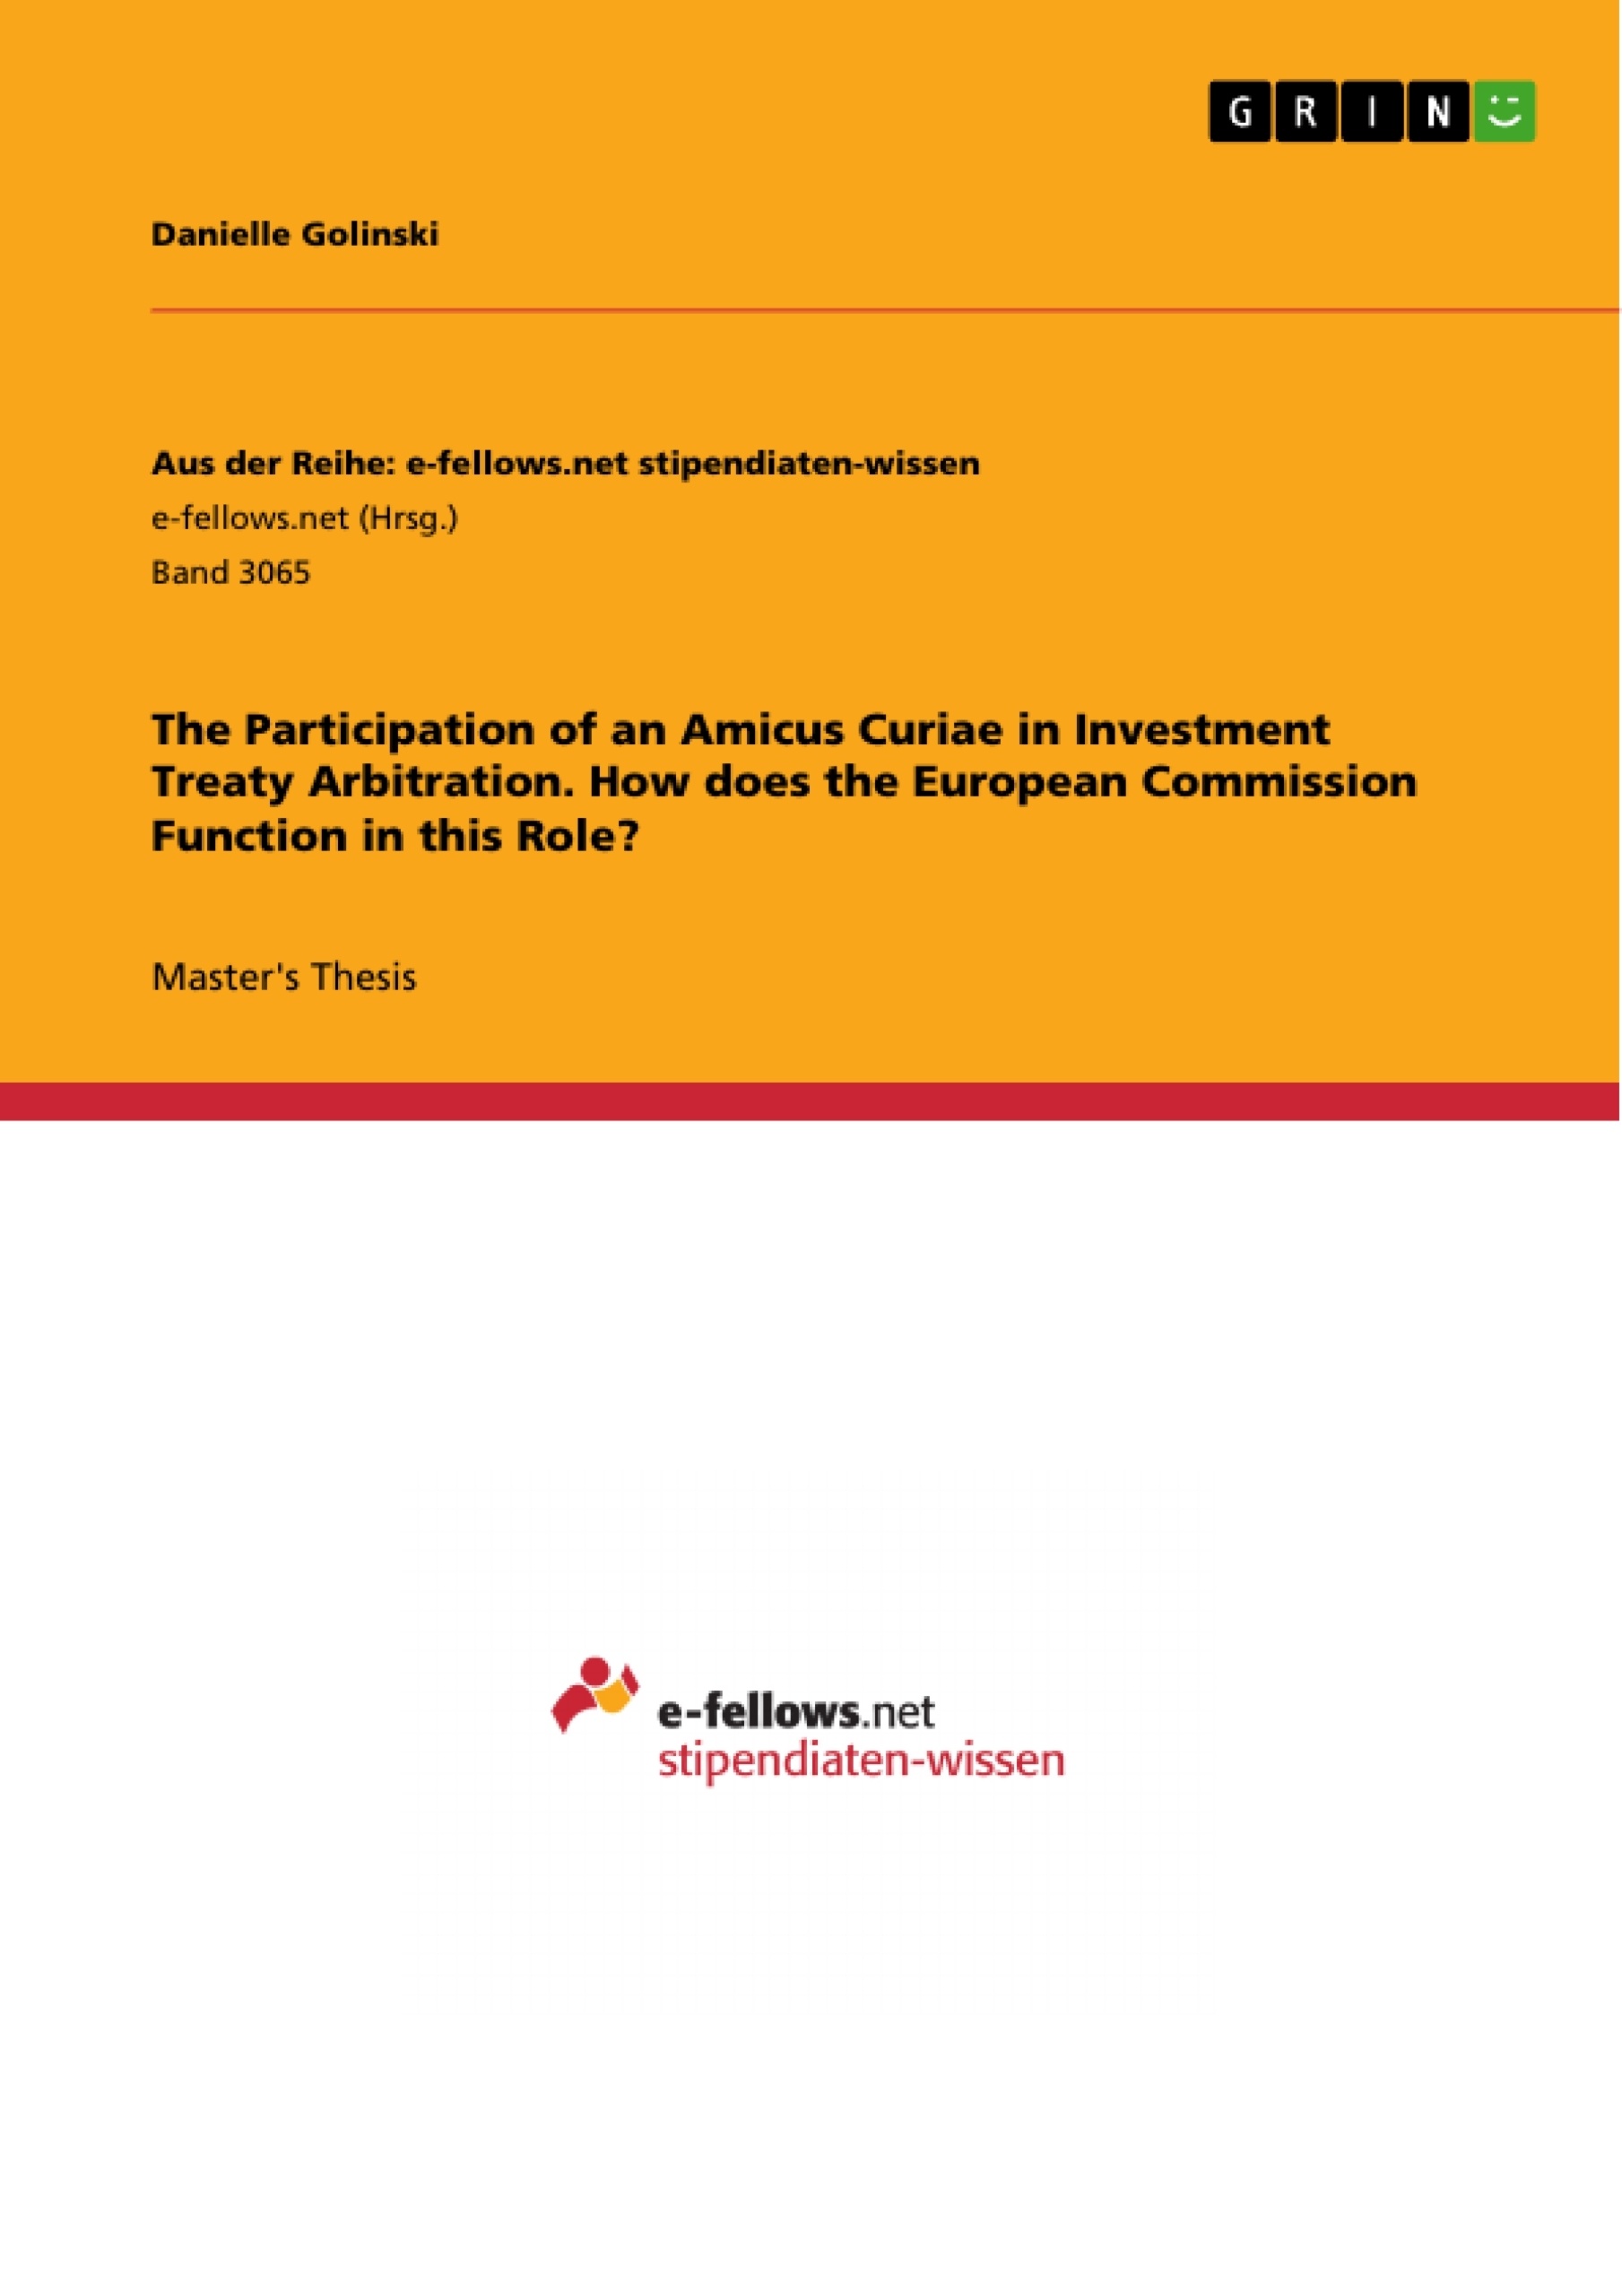 Title: The Participation of an Amicus Curiae in Investment Treaty Arbitration. How does the European Commission Function in this Role?